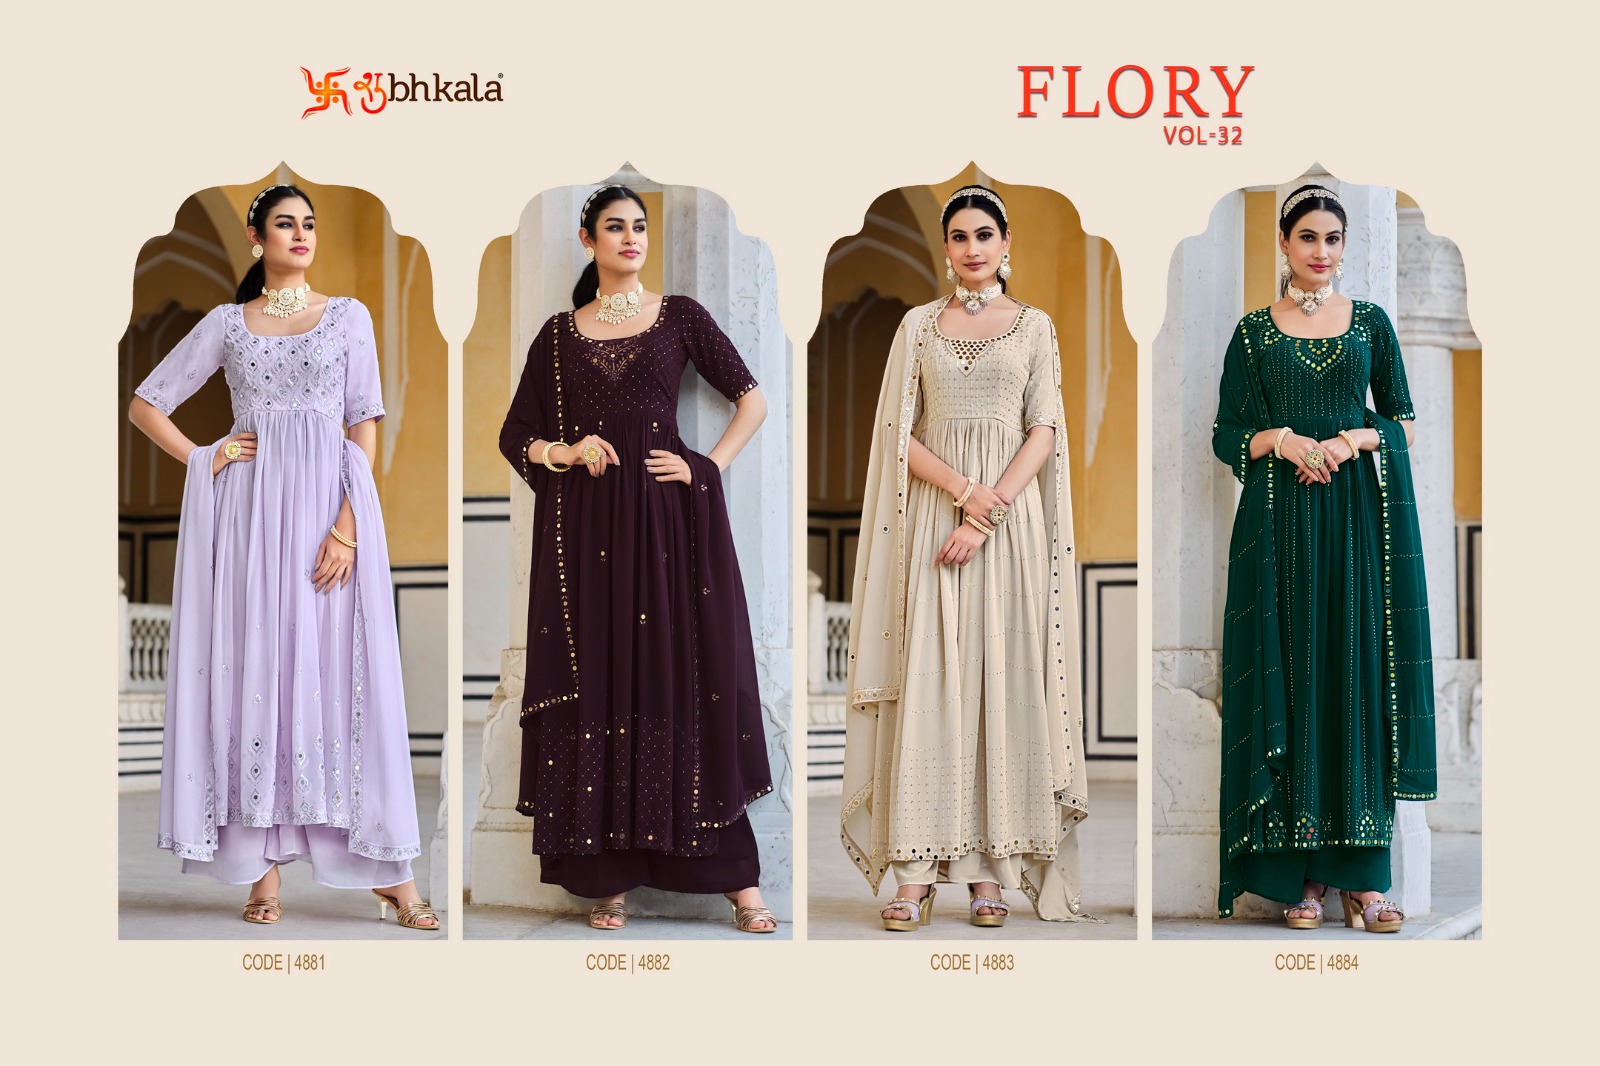 SUBHKALA FLORY VOL. 32 Georgette New Exclusive Embroidered Stitched New Style Salwar Suit Collection